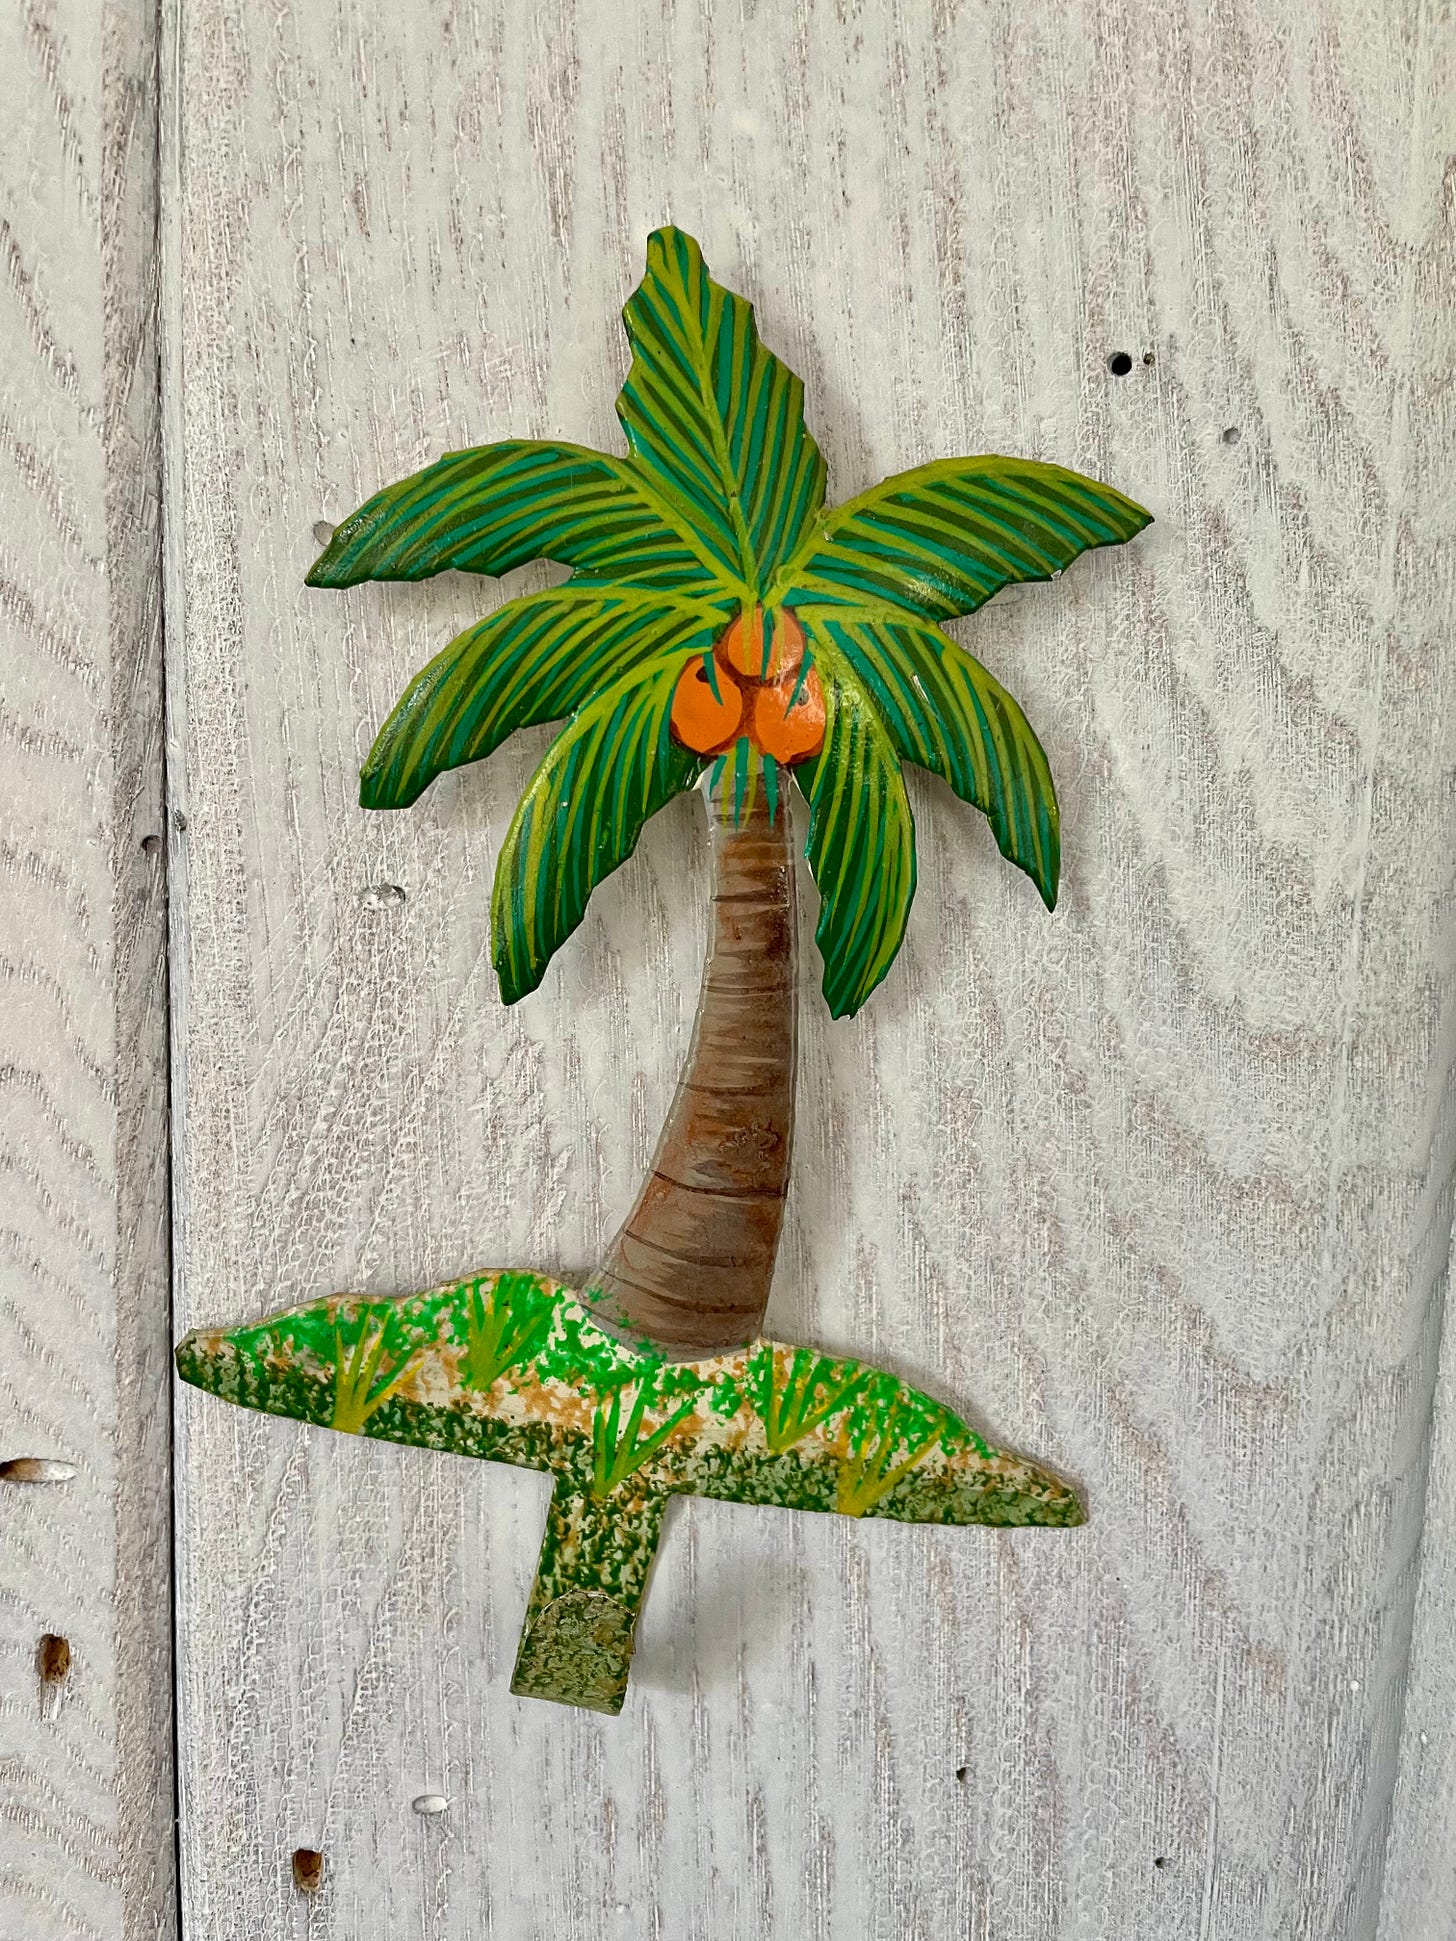 A steel drum palm tree wall hanging made in Haiti.